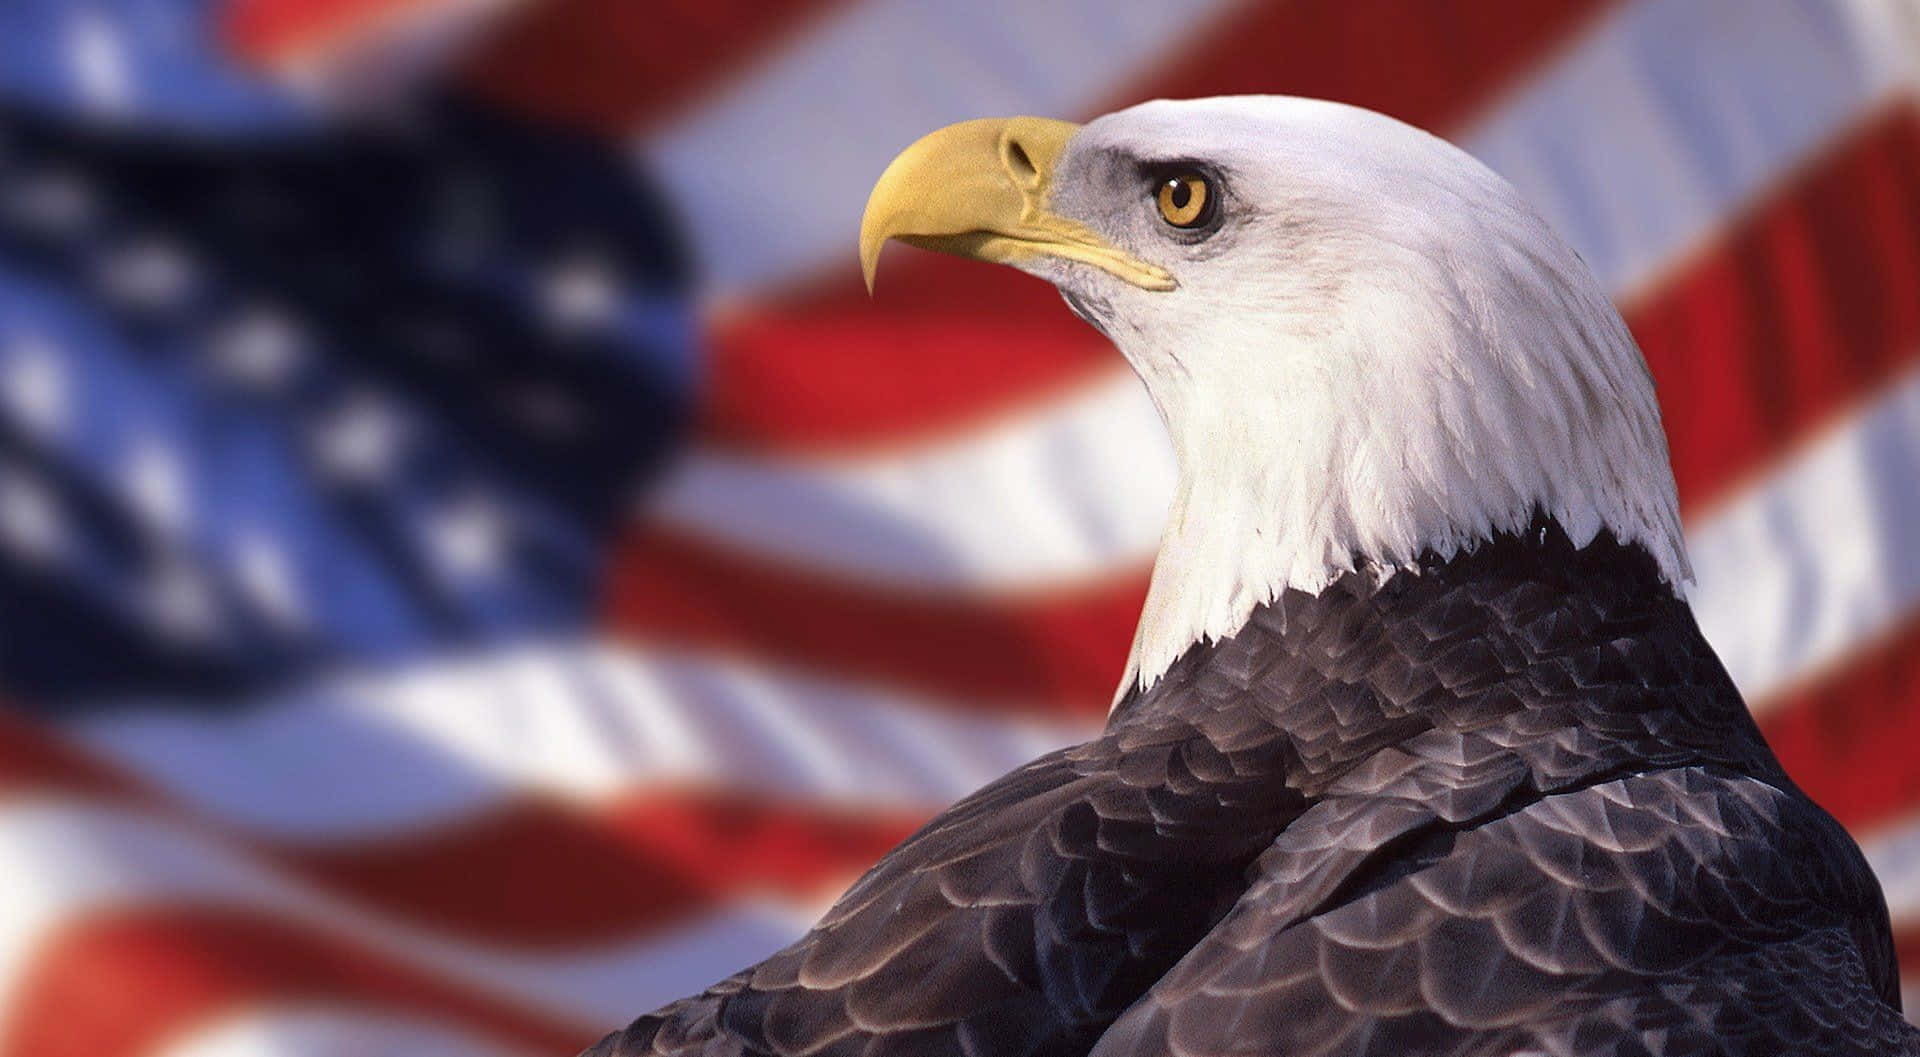 A Bald Eagle Is Standing In Front Of An American Flag Wallpaper